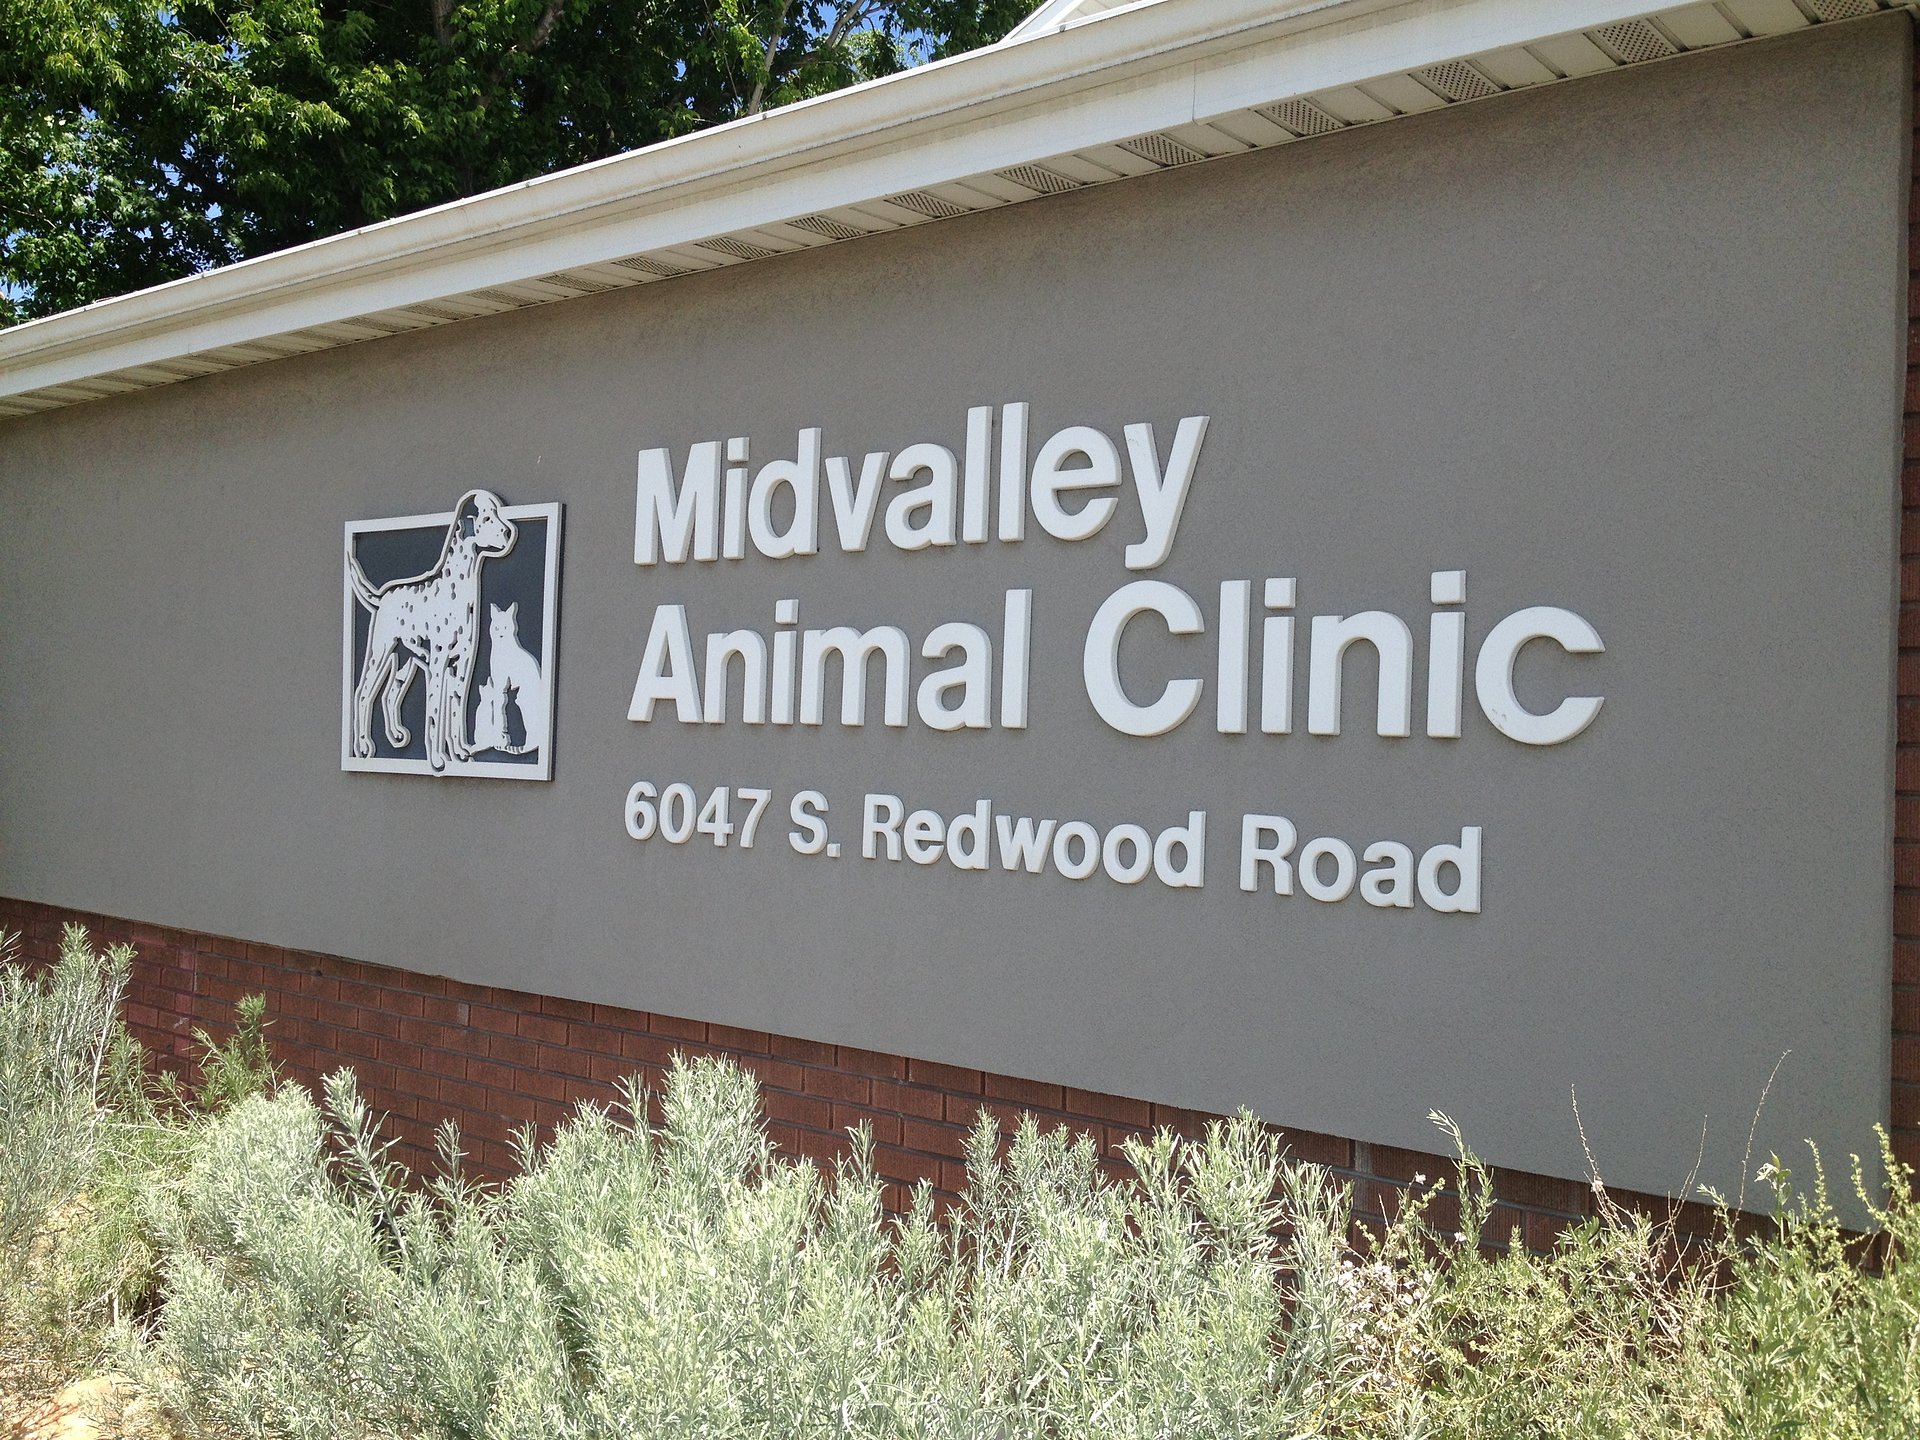 Midvalley Animal Clinic